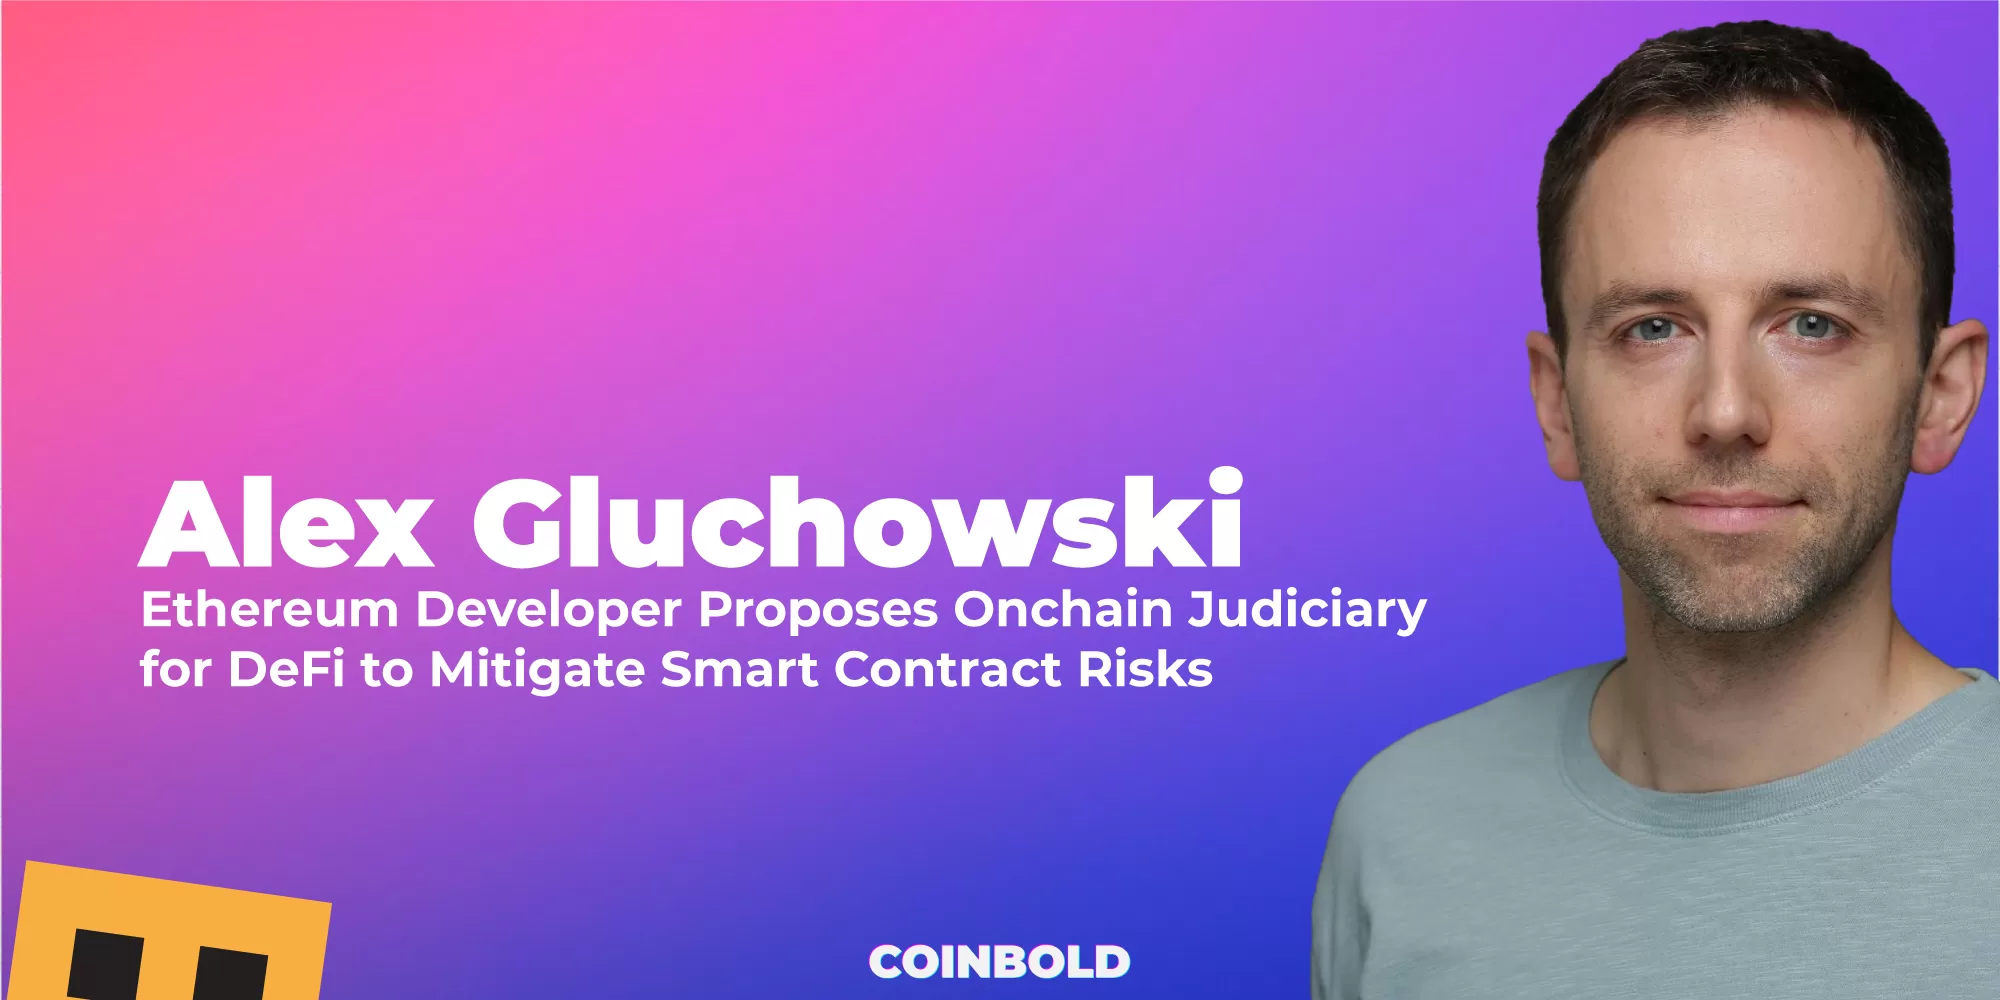 Ethereum Developer Proposes Onchain Judiciary for DeFi to Mitigate Smart Contract Risks